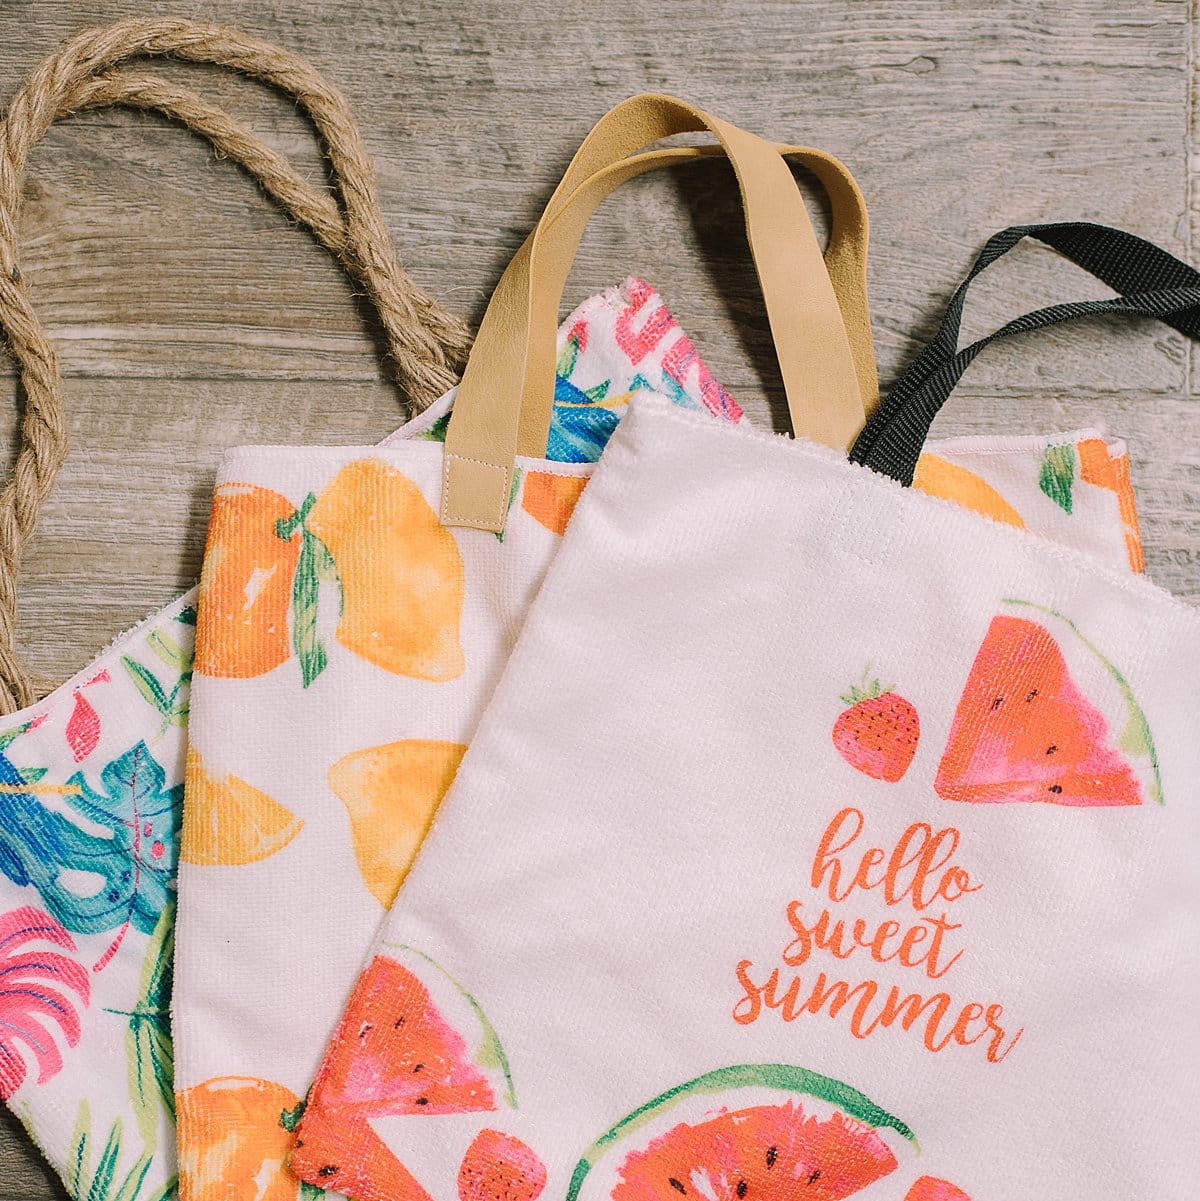 DIY Tote Bags made with Fun Hand Towels from the Dollar Tree